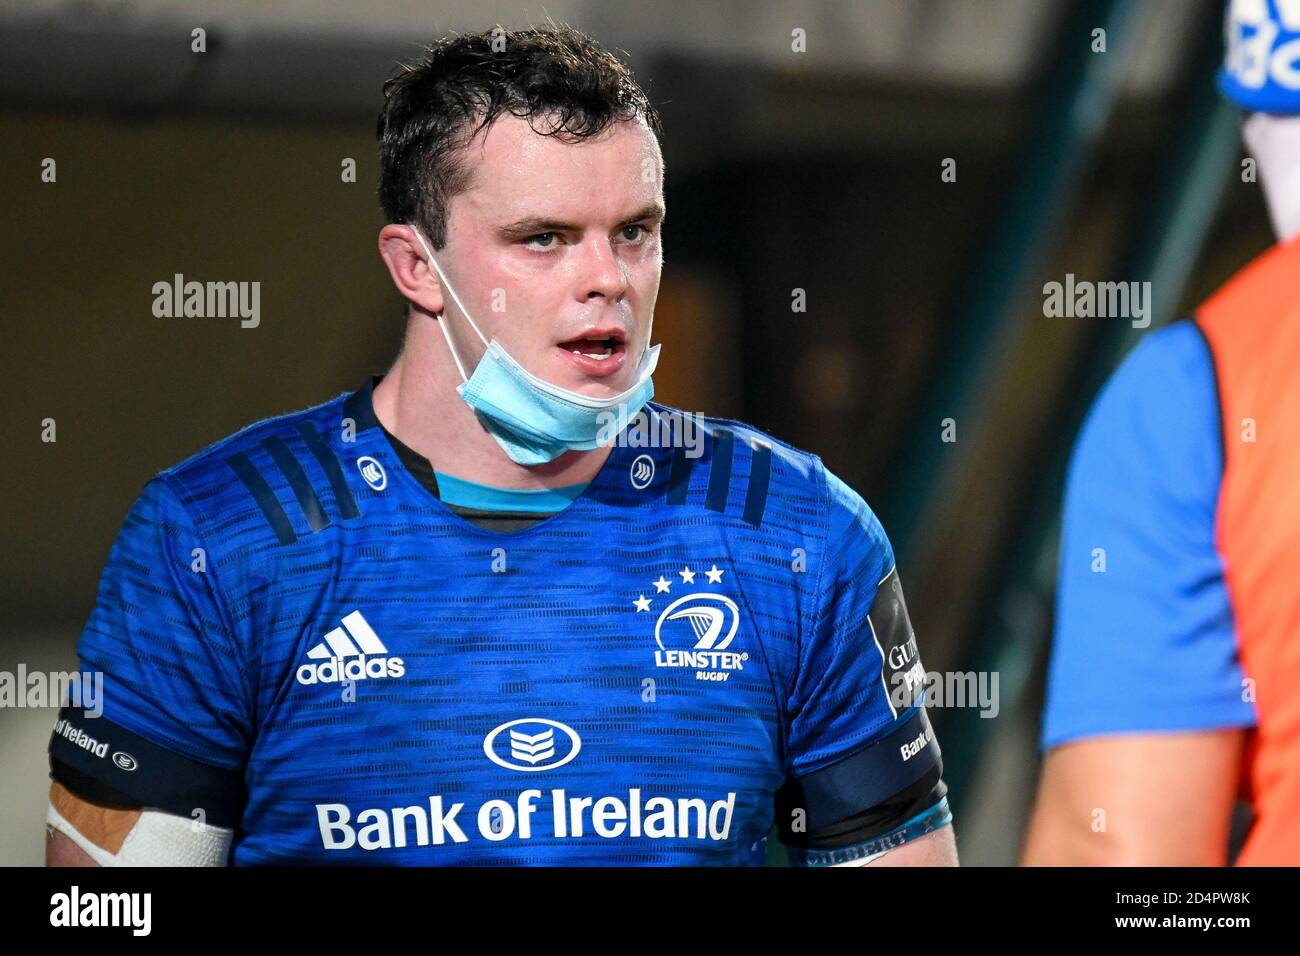 Monigo Stadium, Treviso, Italy, 10 Oct 2020, James Ryan (Leinster) got the  yellow card during Benetton Treviso vs Leinster Rugby, Rugby Guinness Pro  14 - Credit: LM/Ettore Griffoni/Alamy Live News Stock Photo - Alamy